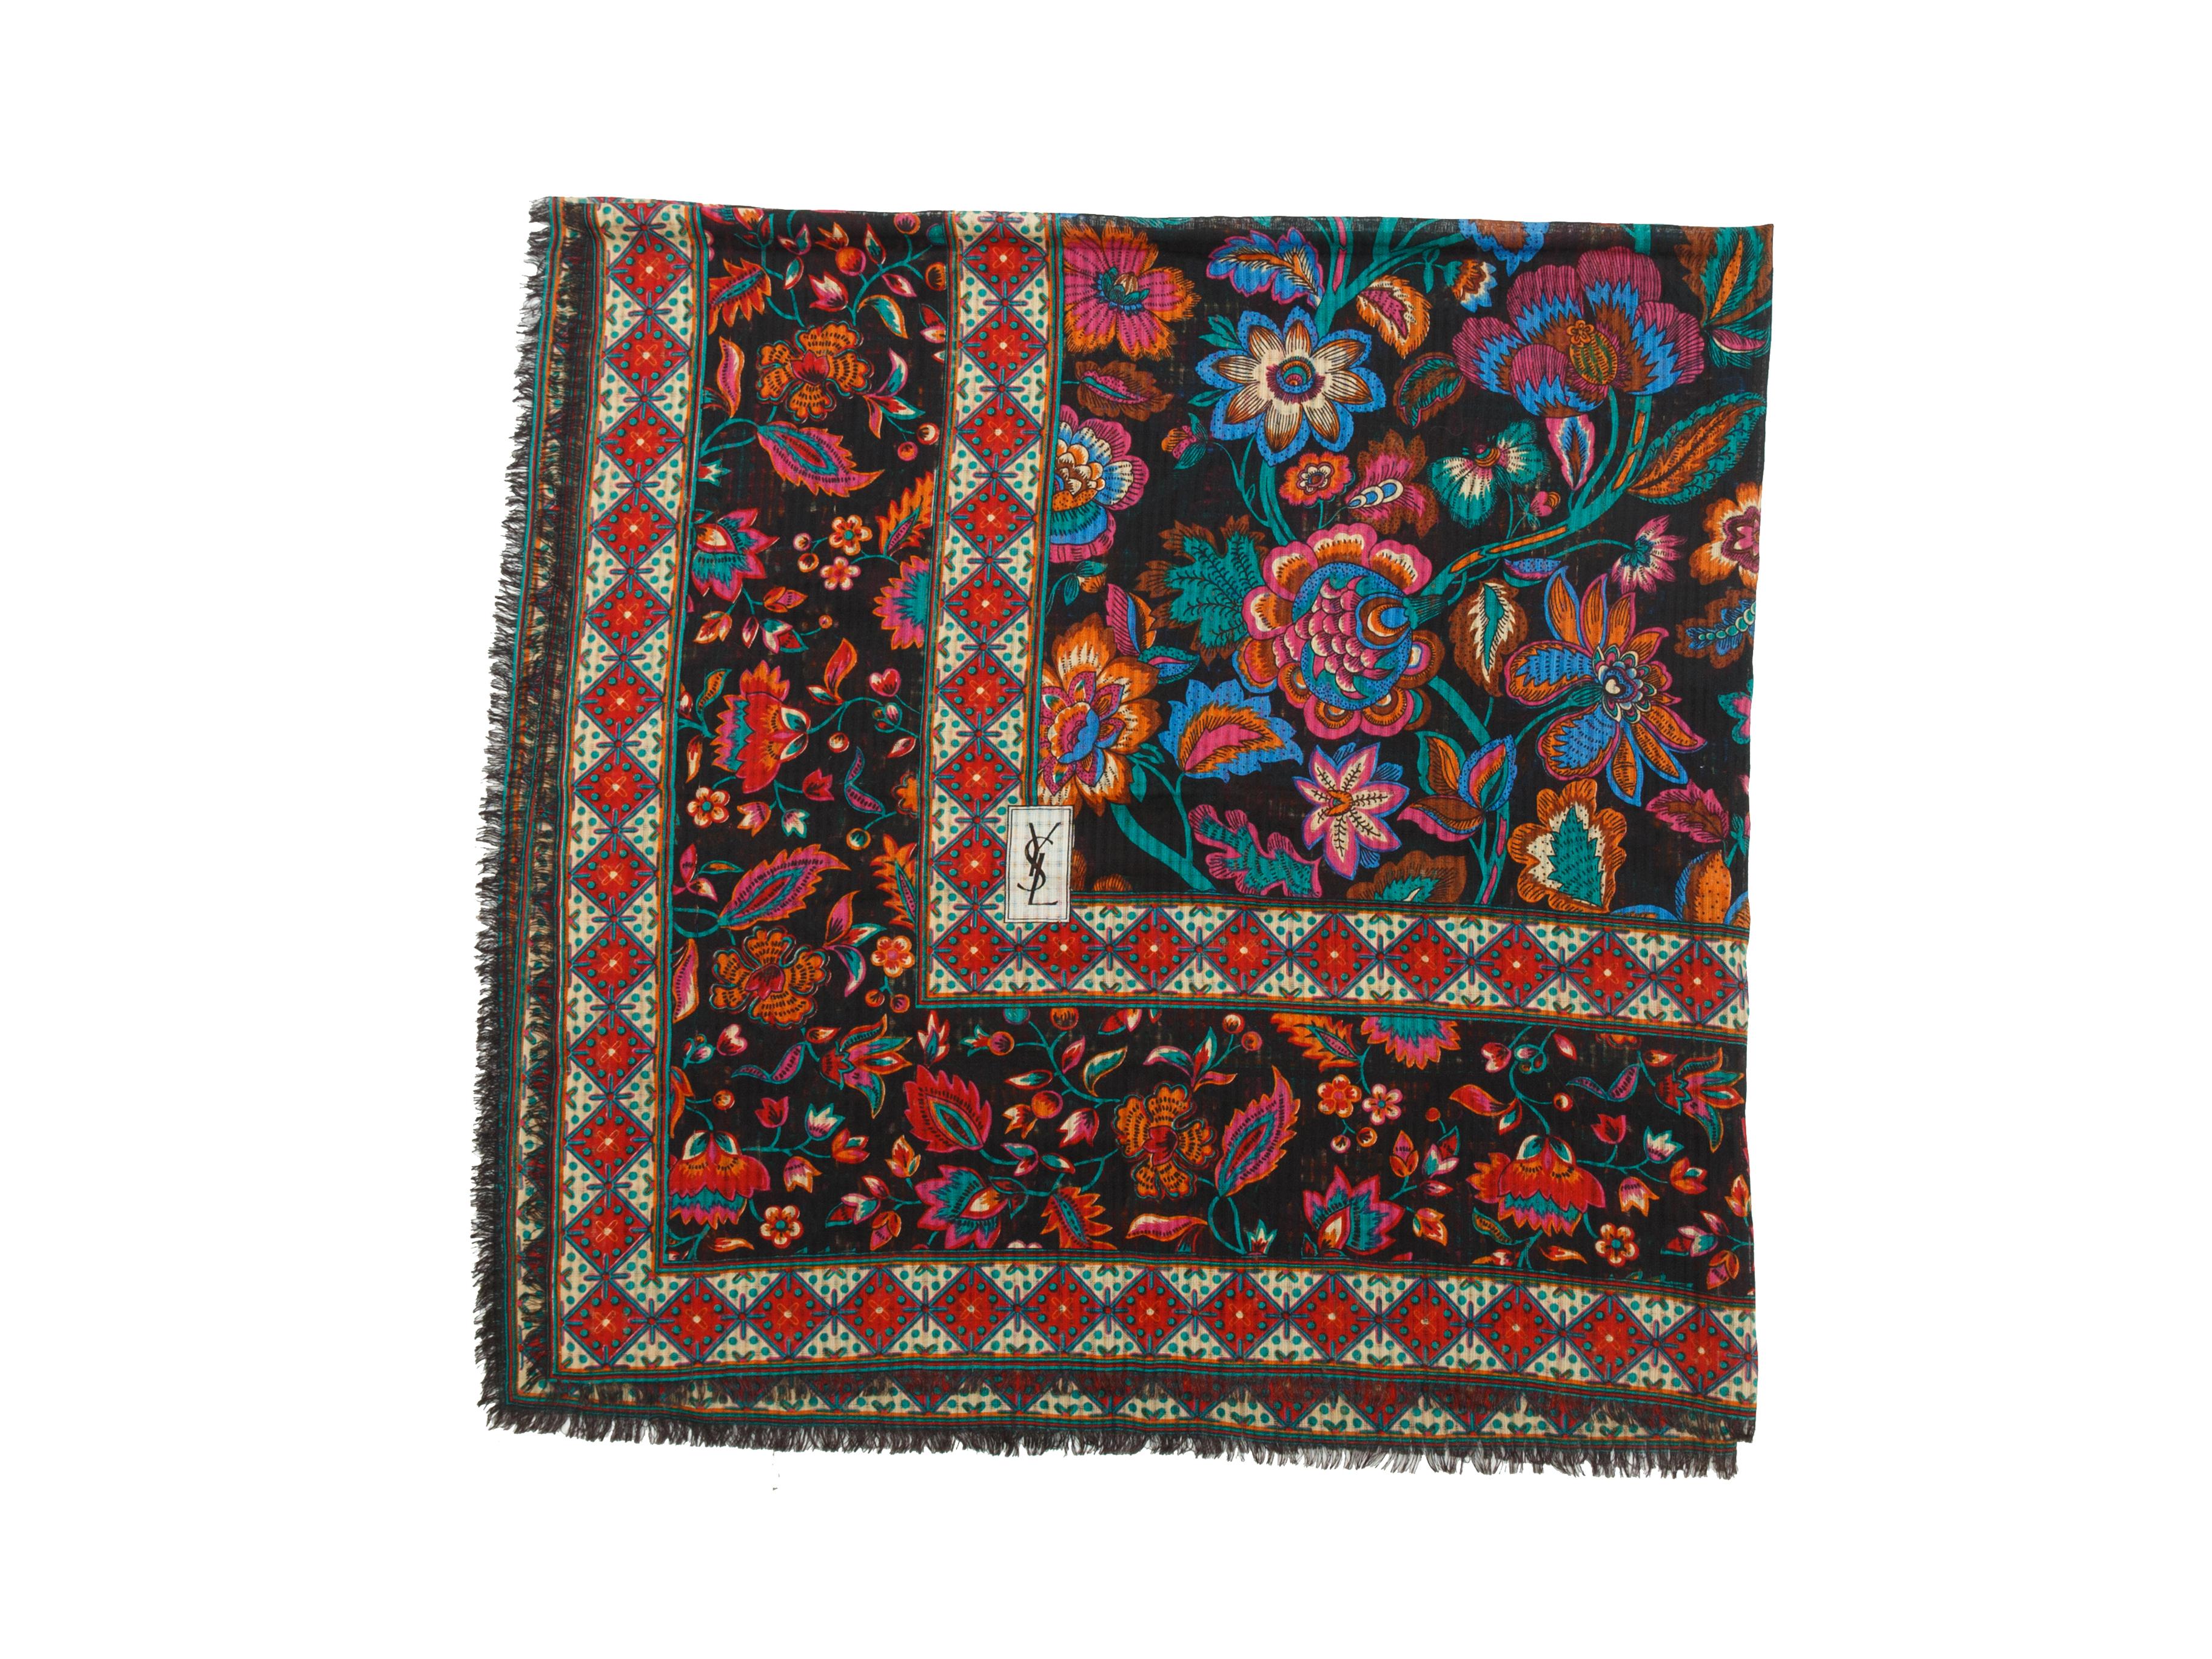 Product details: Black and multicolor woven scarf by Yves Saint Laurent. Floral print throughout. 55